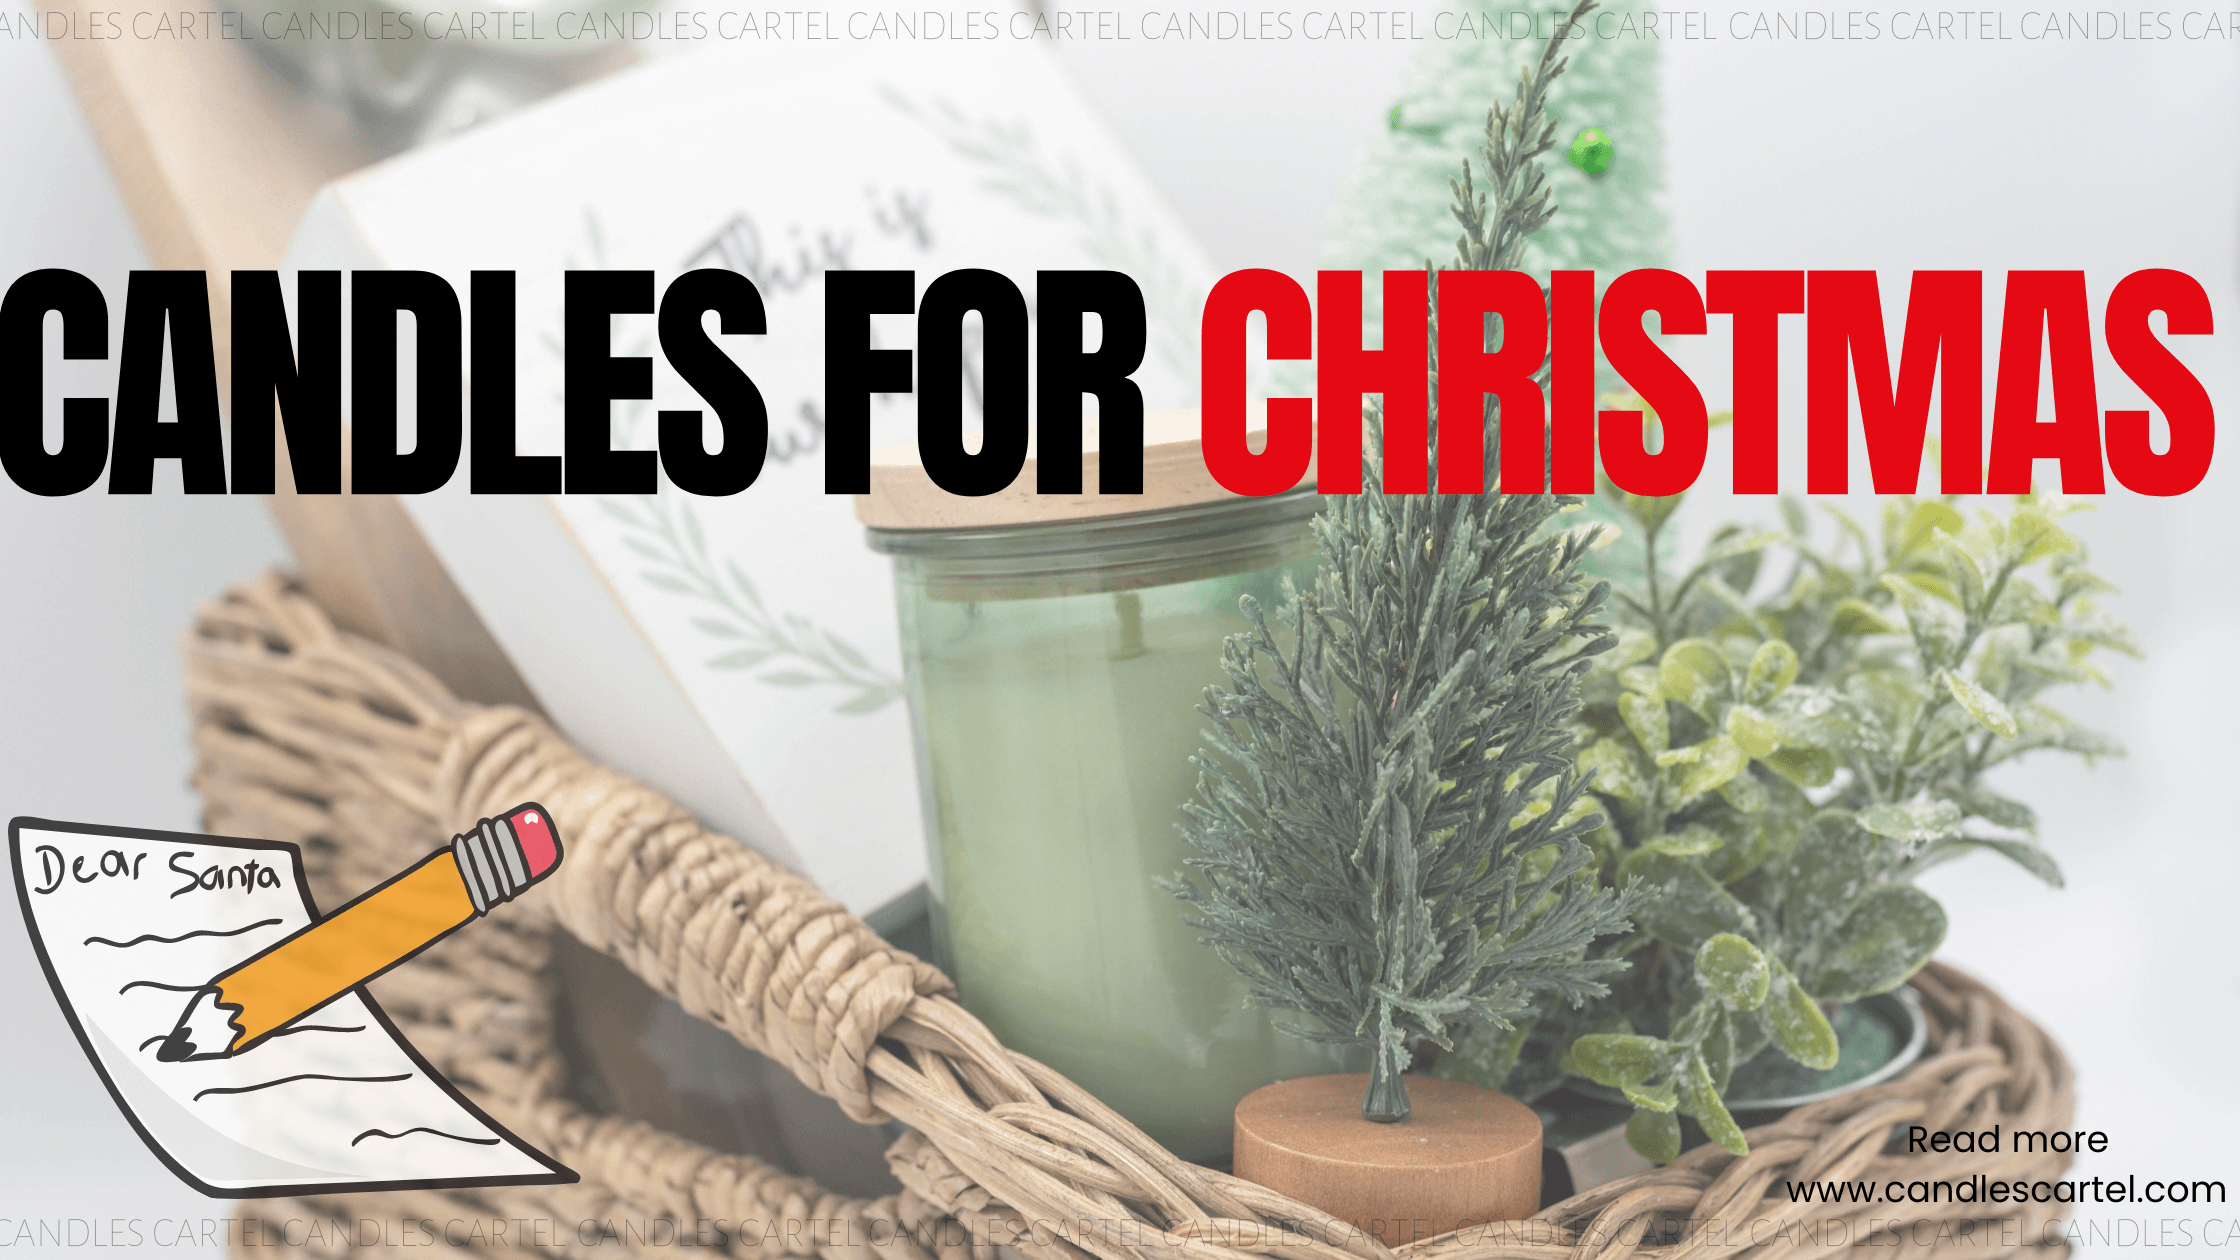 Candles for Christmas Gift Baskets  - Blog Article